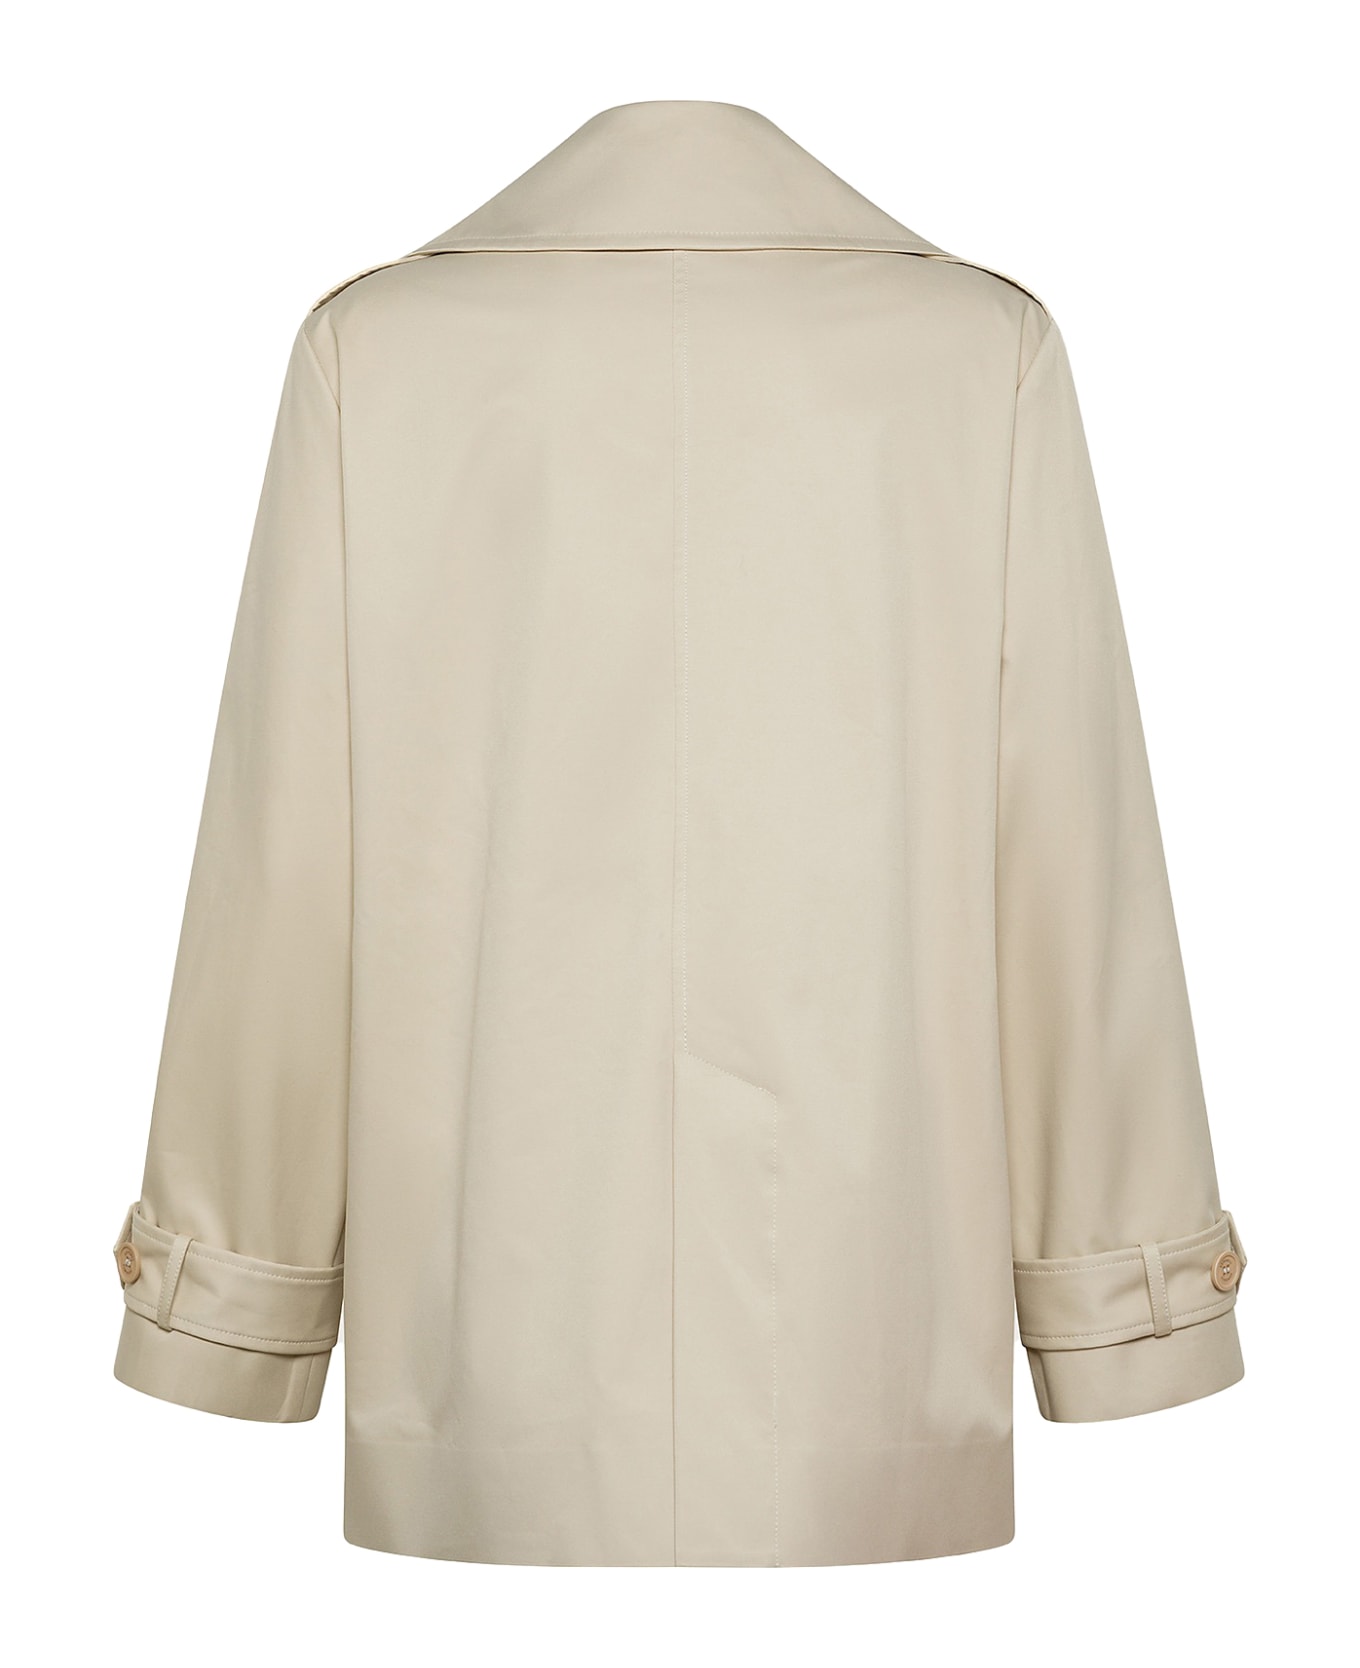 Seventy Beige Double-breasted Trench Coat - NERO